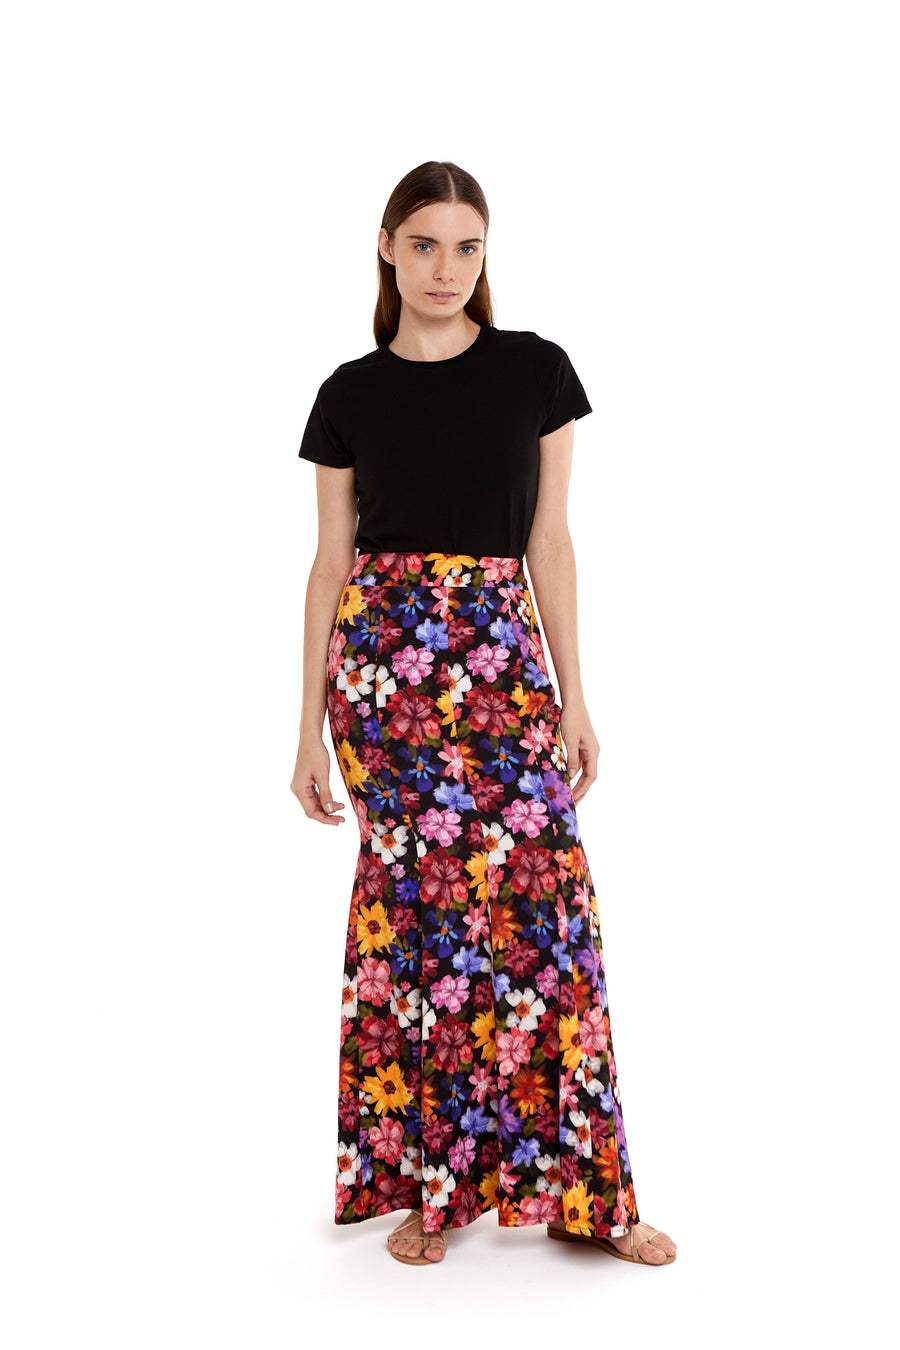 Camille Giverny Noche Skirt